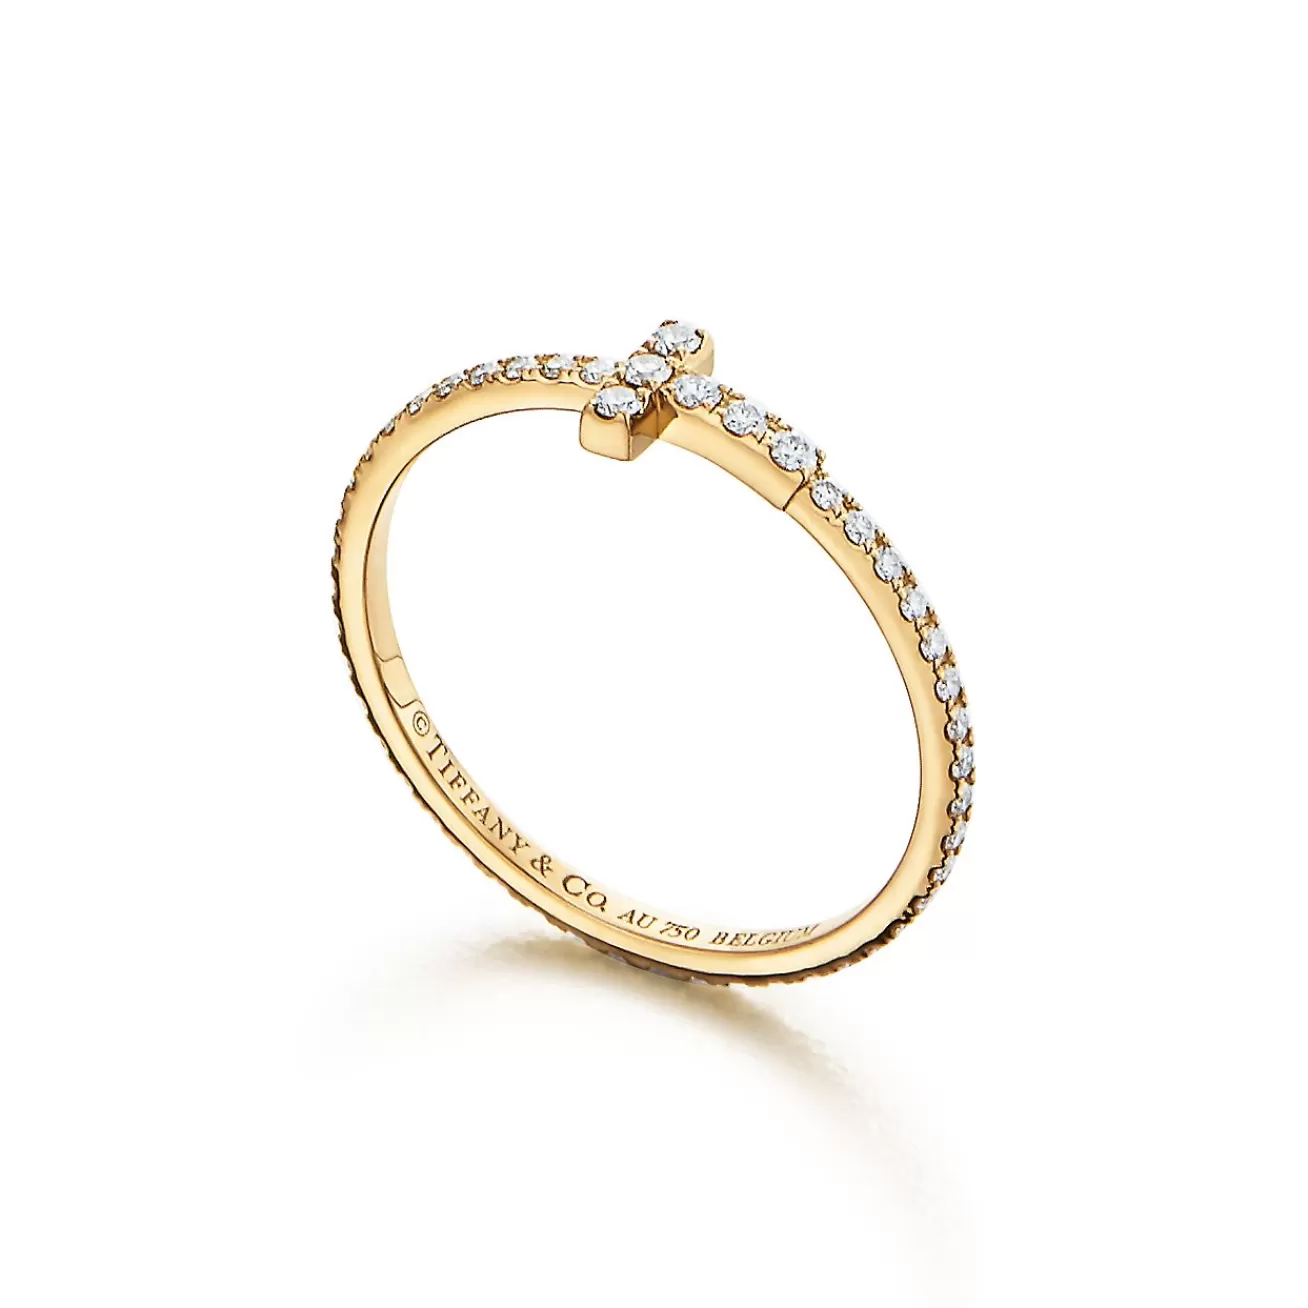 Tiffany & Co. Tiffany T diamond wire band ring in 18k gold. | ^ Rings | Men's Jewelry